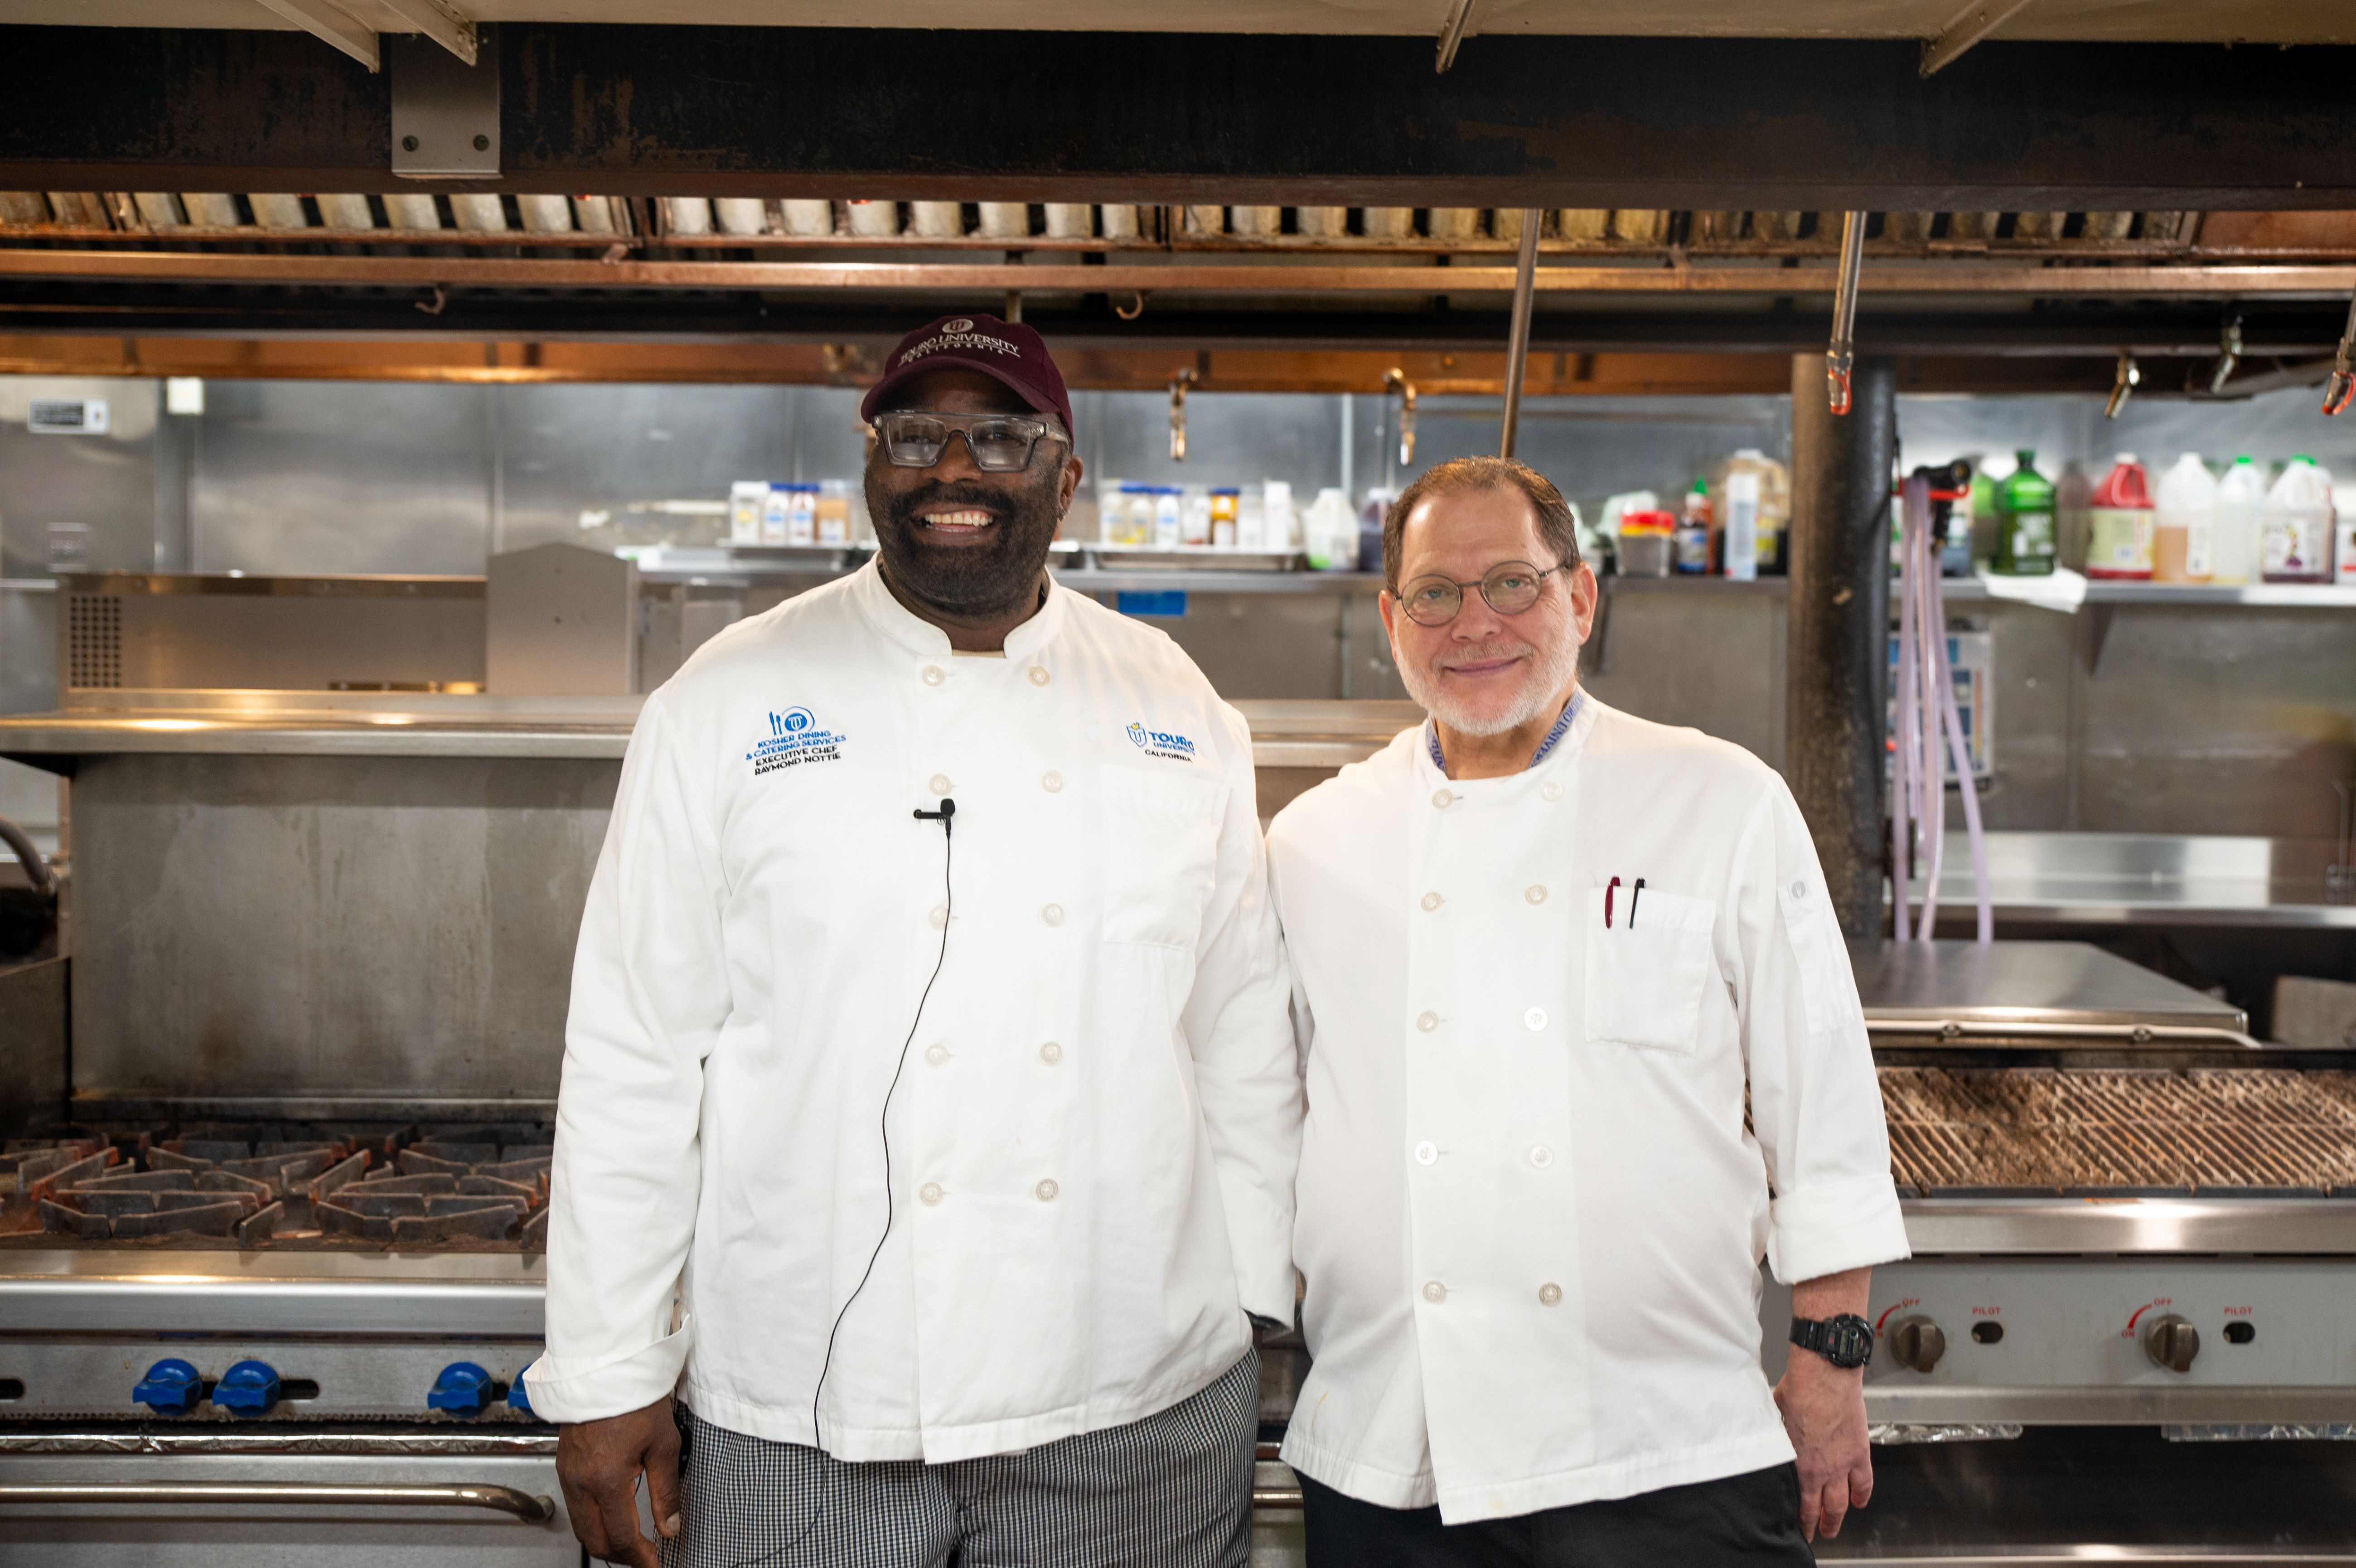 Chef Ray Nottie (left) stands next to Mashgiach Kalman Winnick (right) inside the TUC Kitchen where meat is cooked.